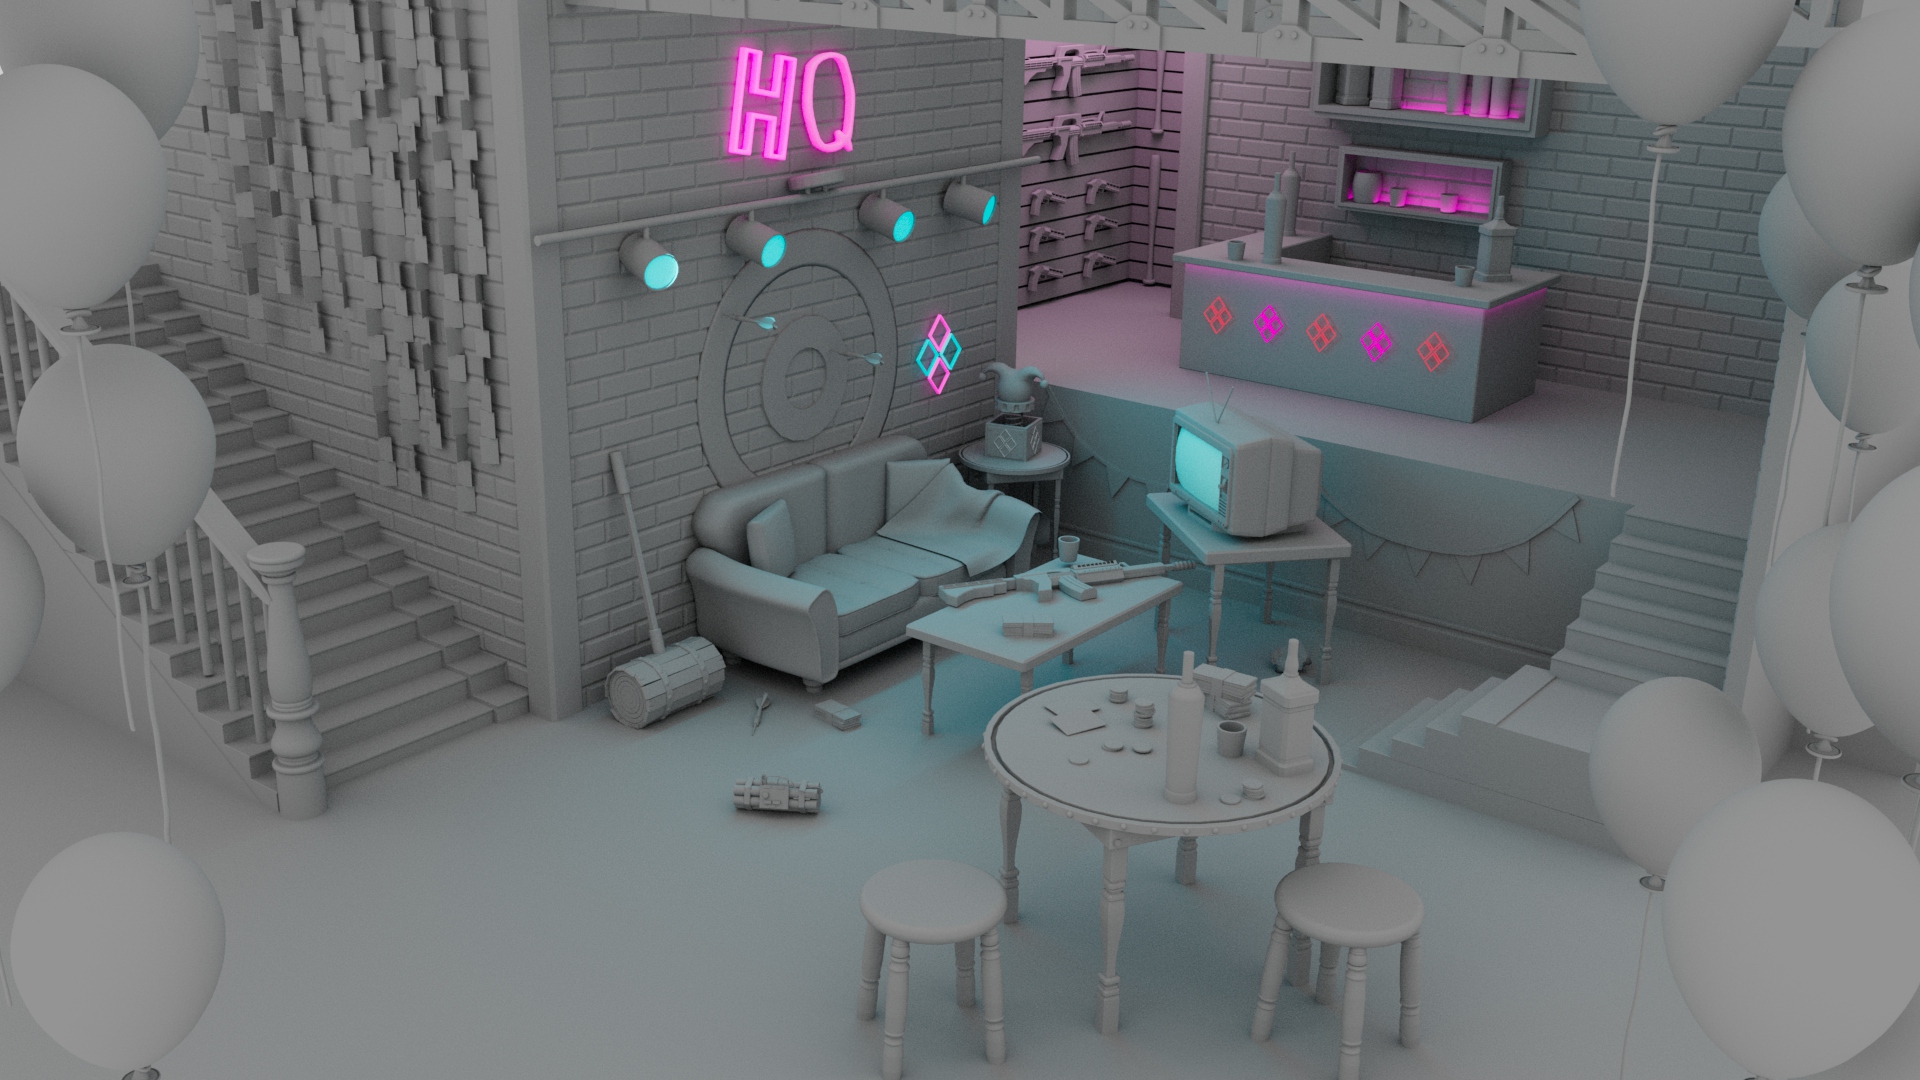 Stylized 3D render of an interior room